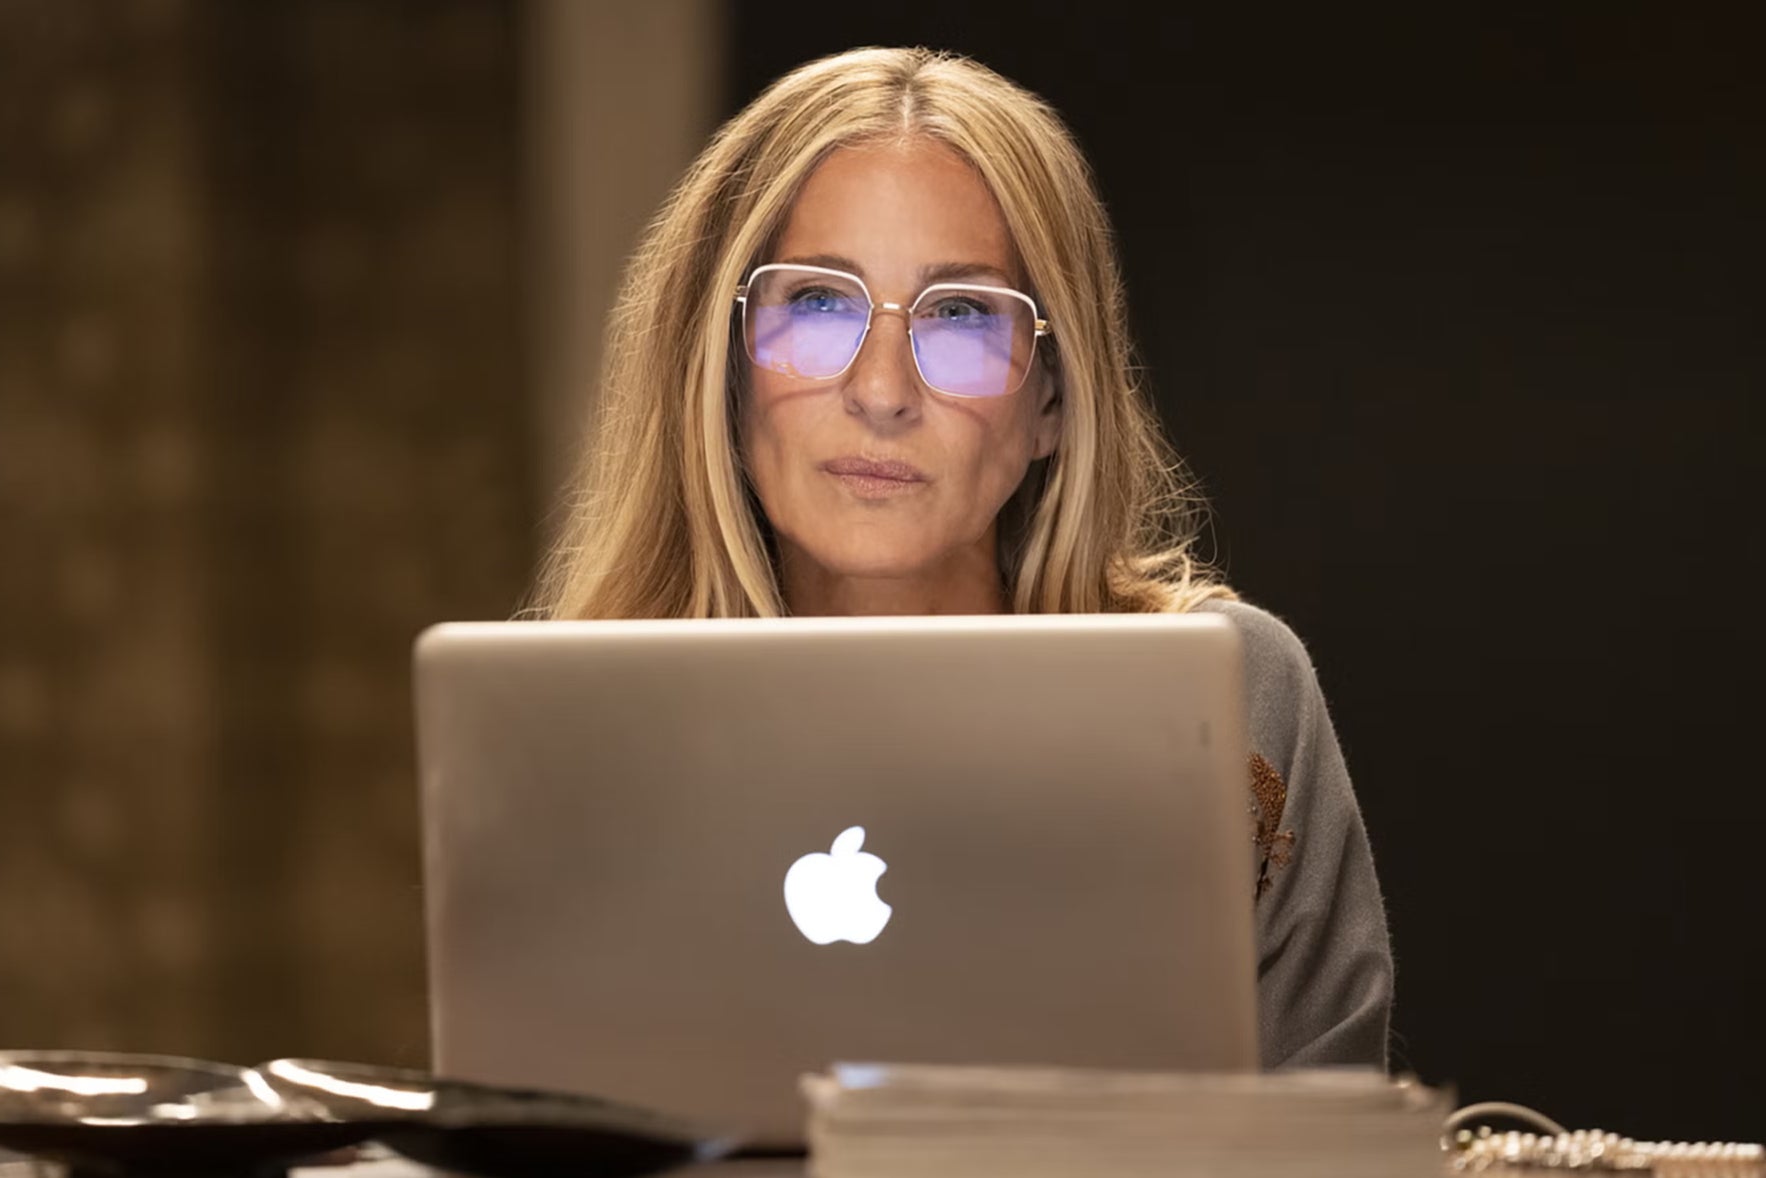 Still wondering: Sarah Jessica Parker as Carrie Bradshaw in the ‘Sex and the City’ sequel series ‘And Just Like That...'